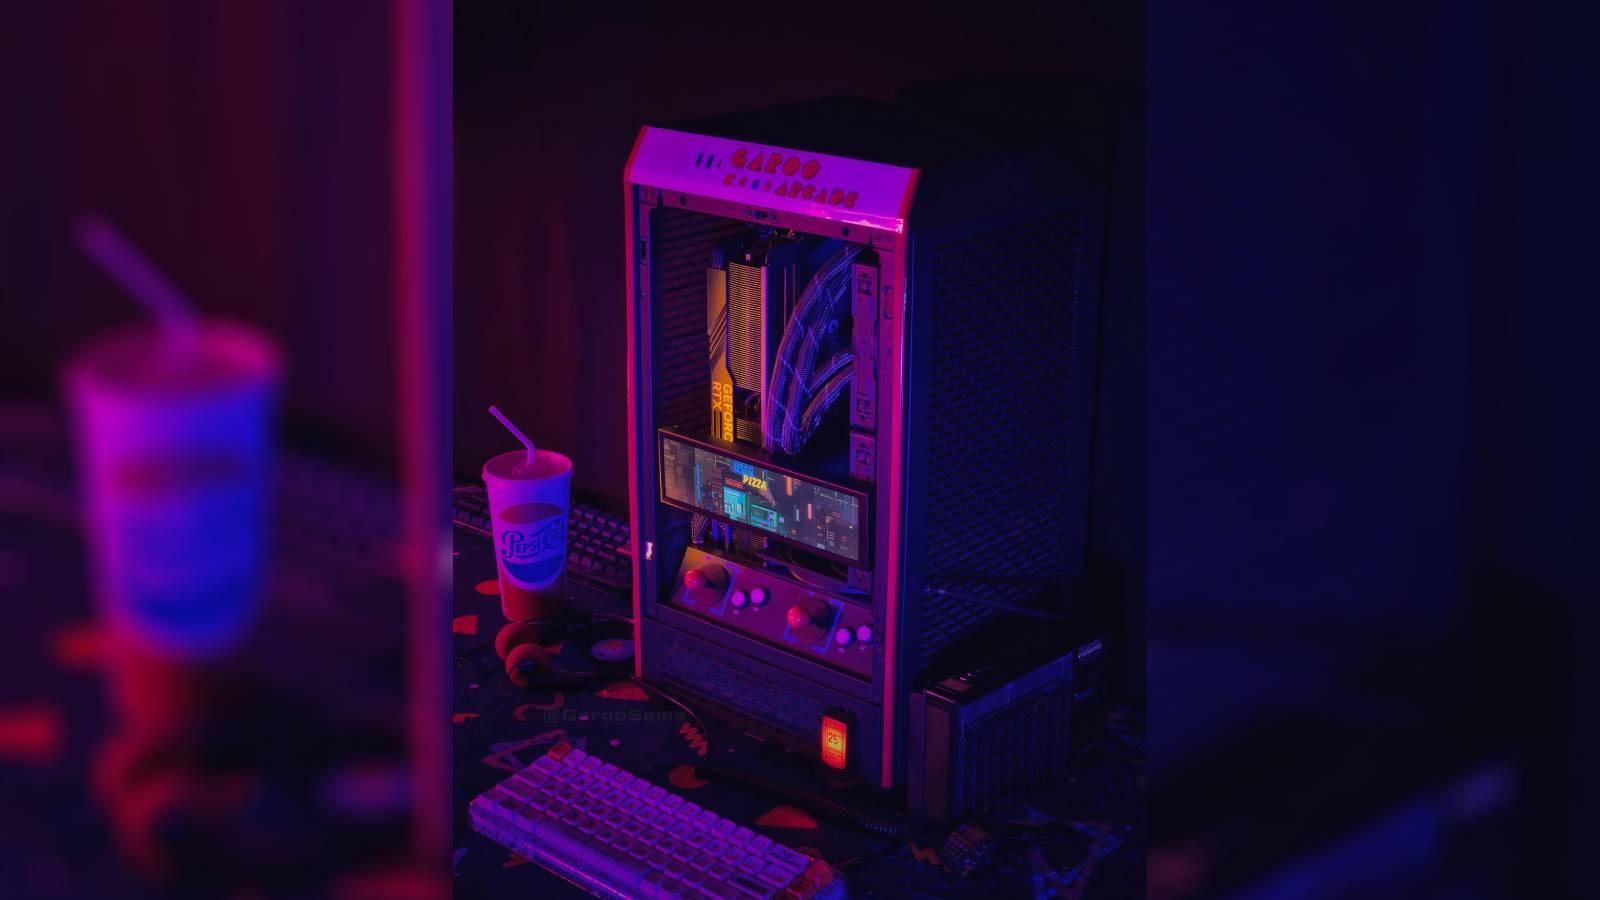 Modded PC case with 80s arcade style